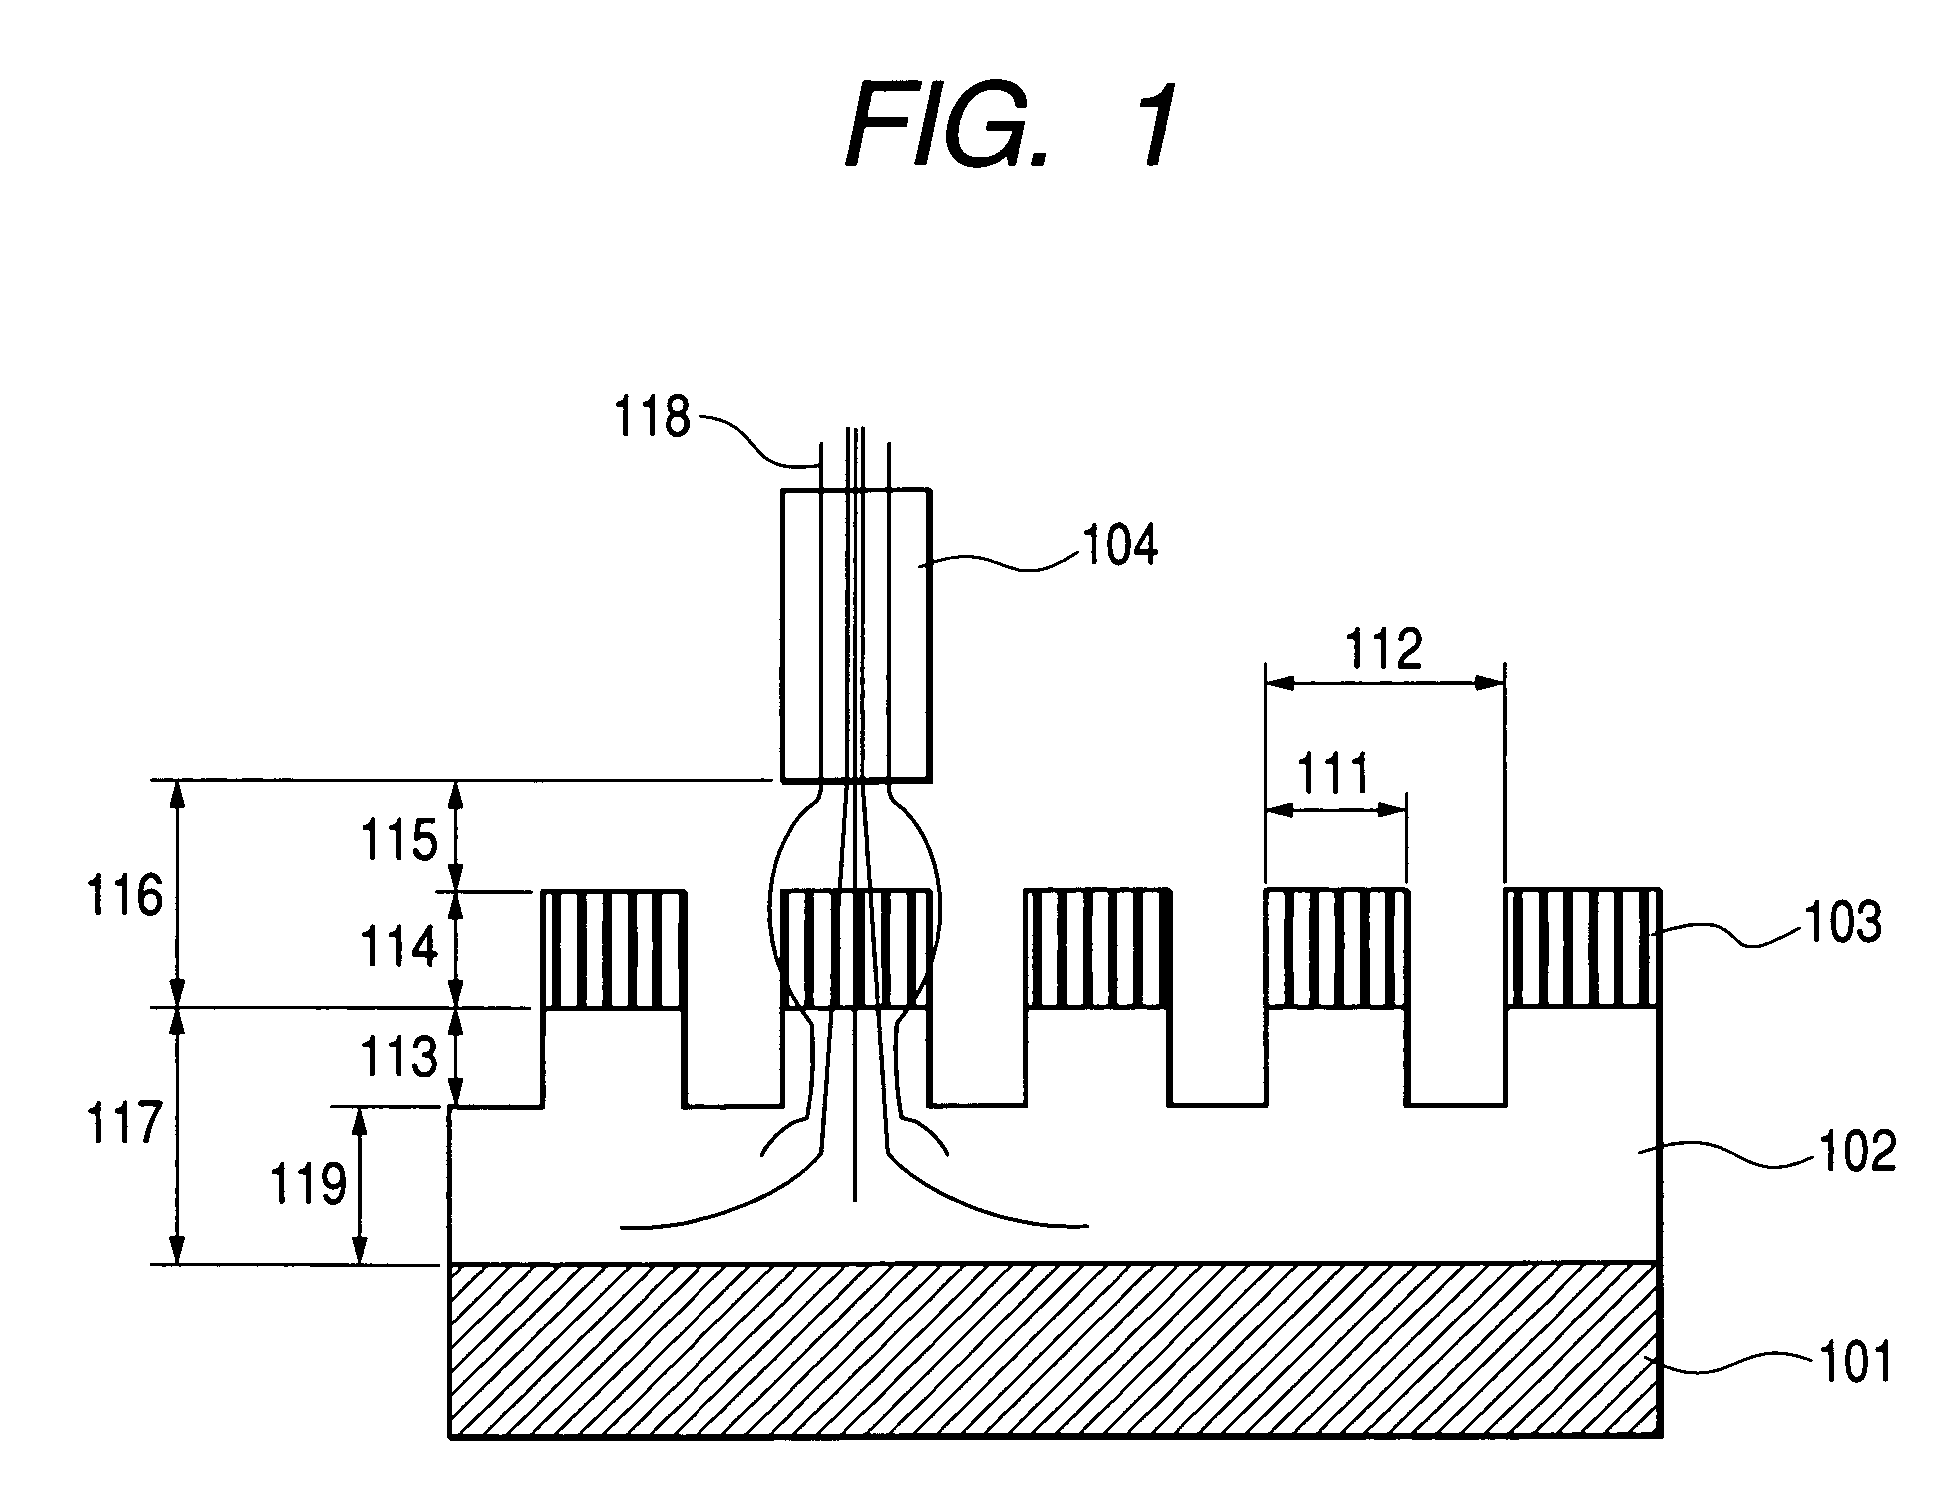 Magnetic recording media and method of forming them